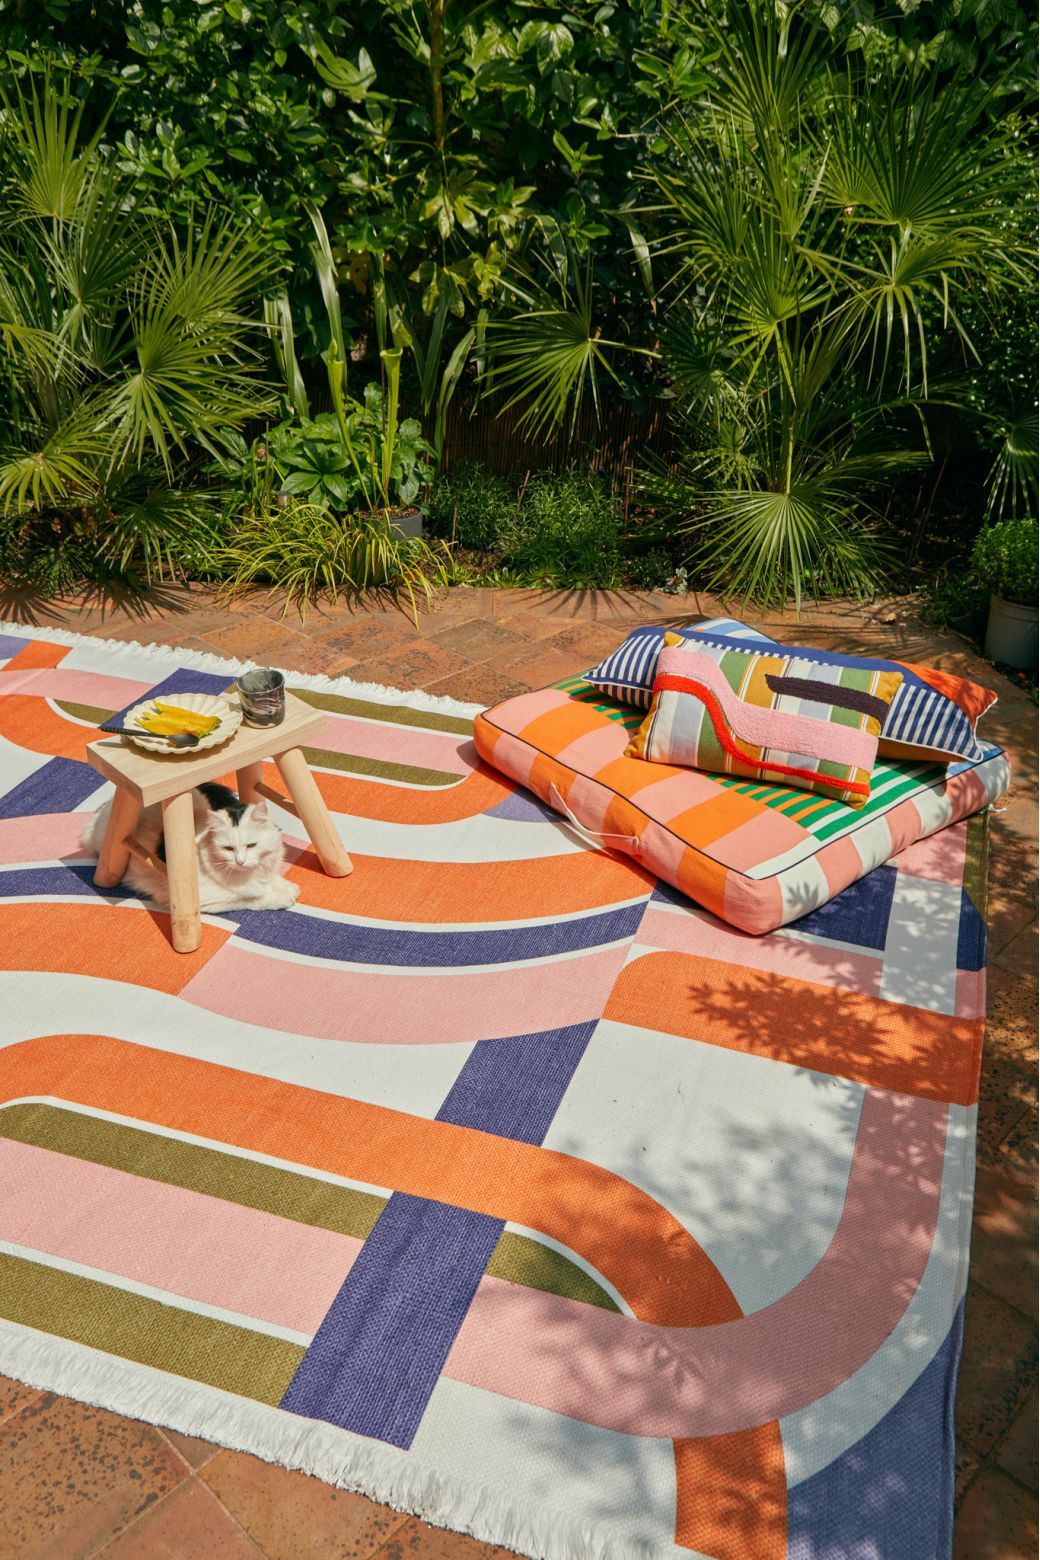 A very important but often neglected part of your house, the outdoor rug!